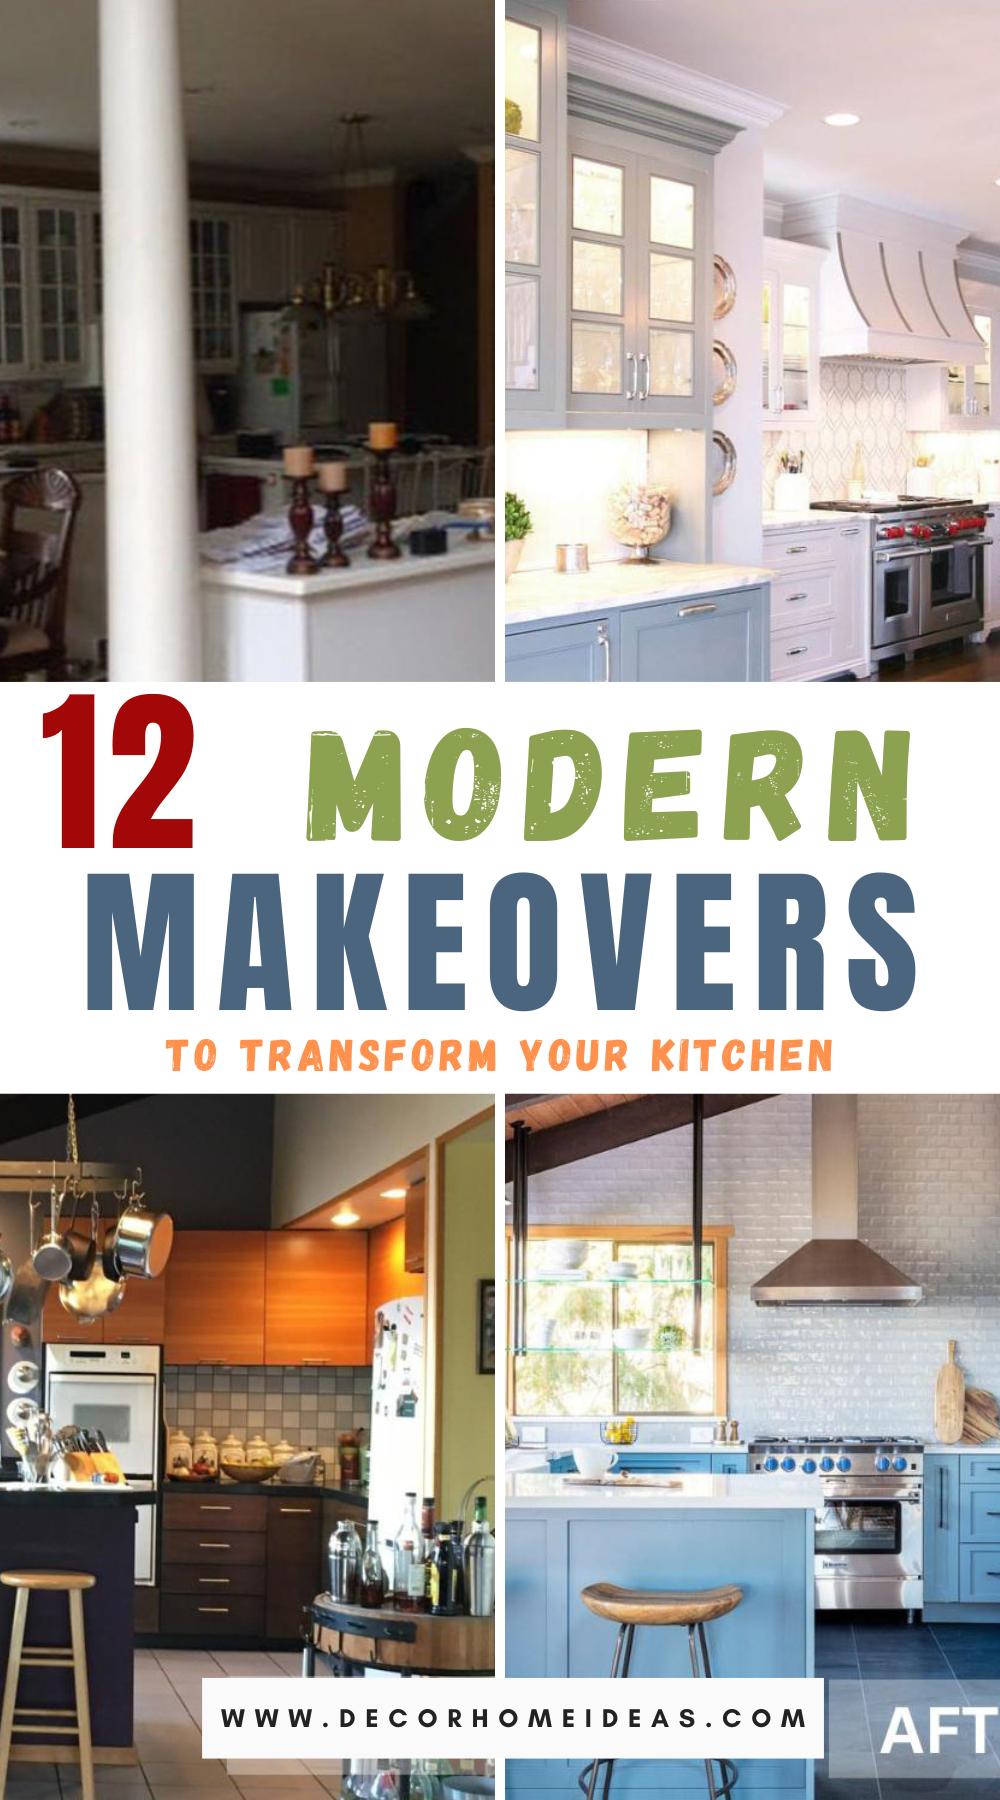 Revitalize your kitchen with these 12 modern makeovers that will transform your cooking space into a contemporary masterpiece. Explore sleek design ideas and innovative solutions for a stylish and functional kitchen.